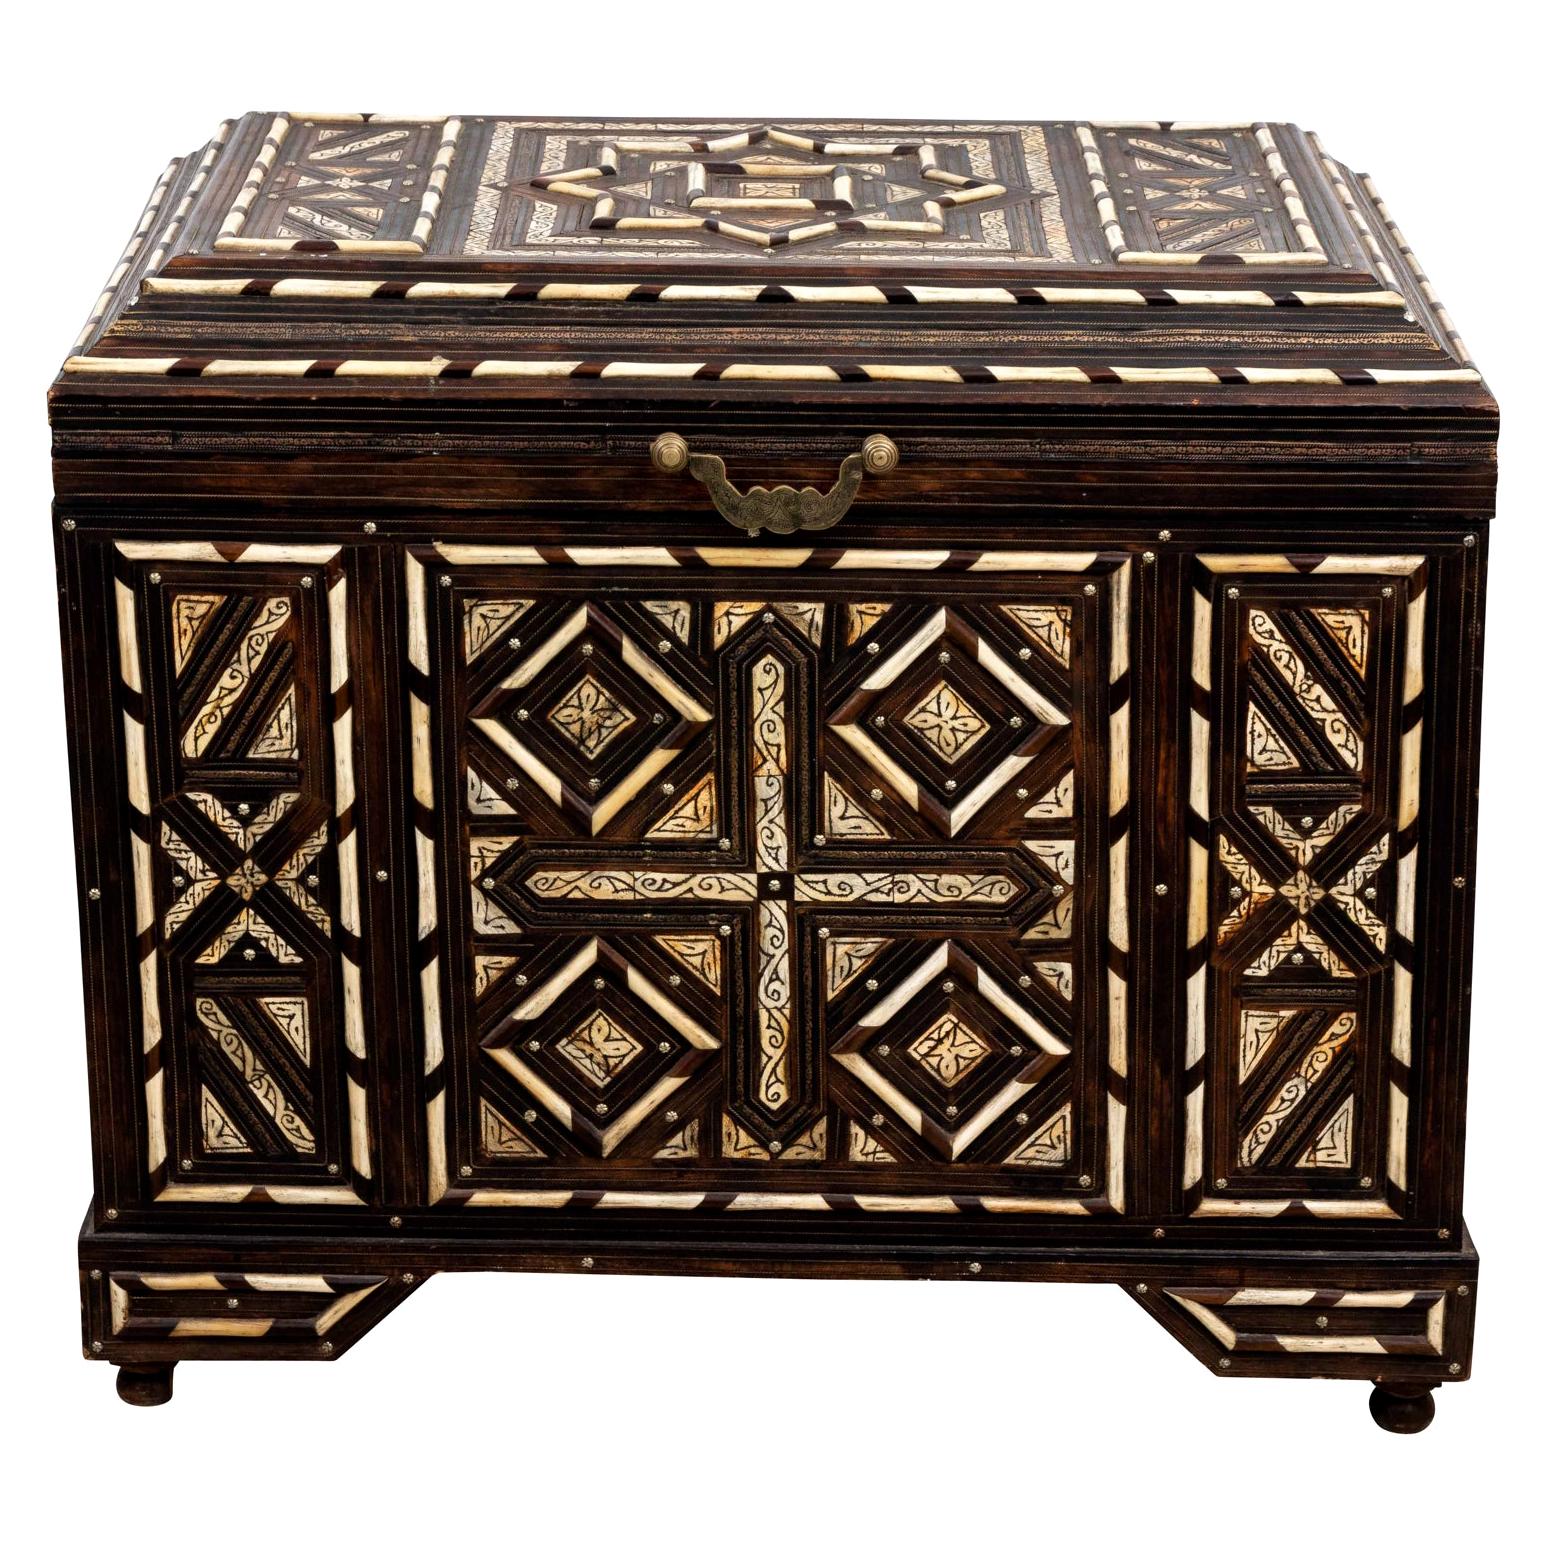 Bone Inlaid Anglo Indian Style Trunk